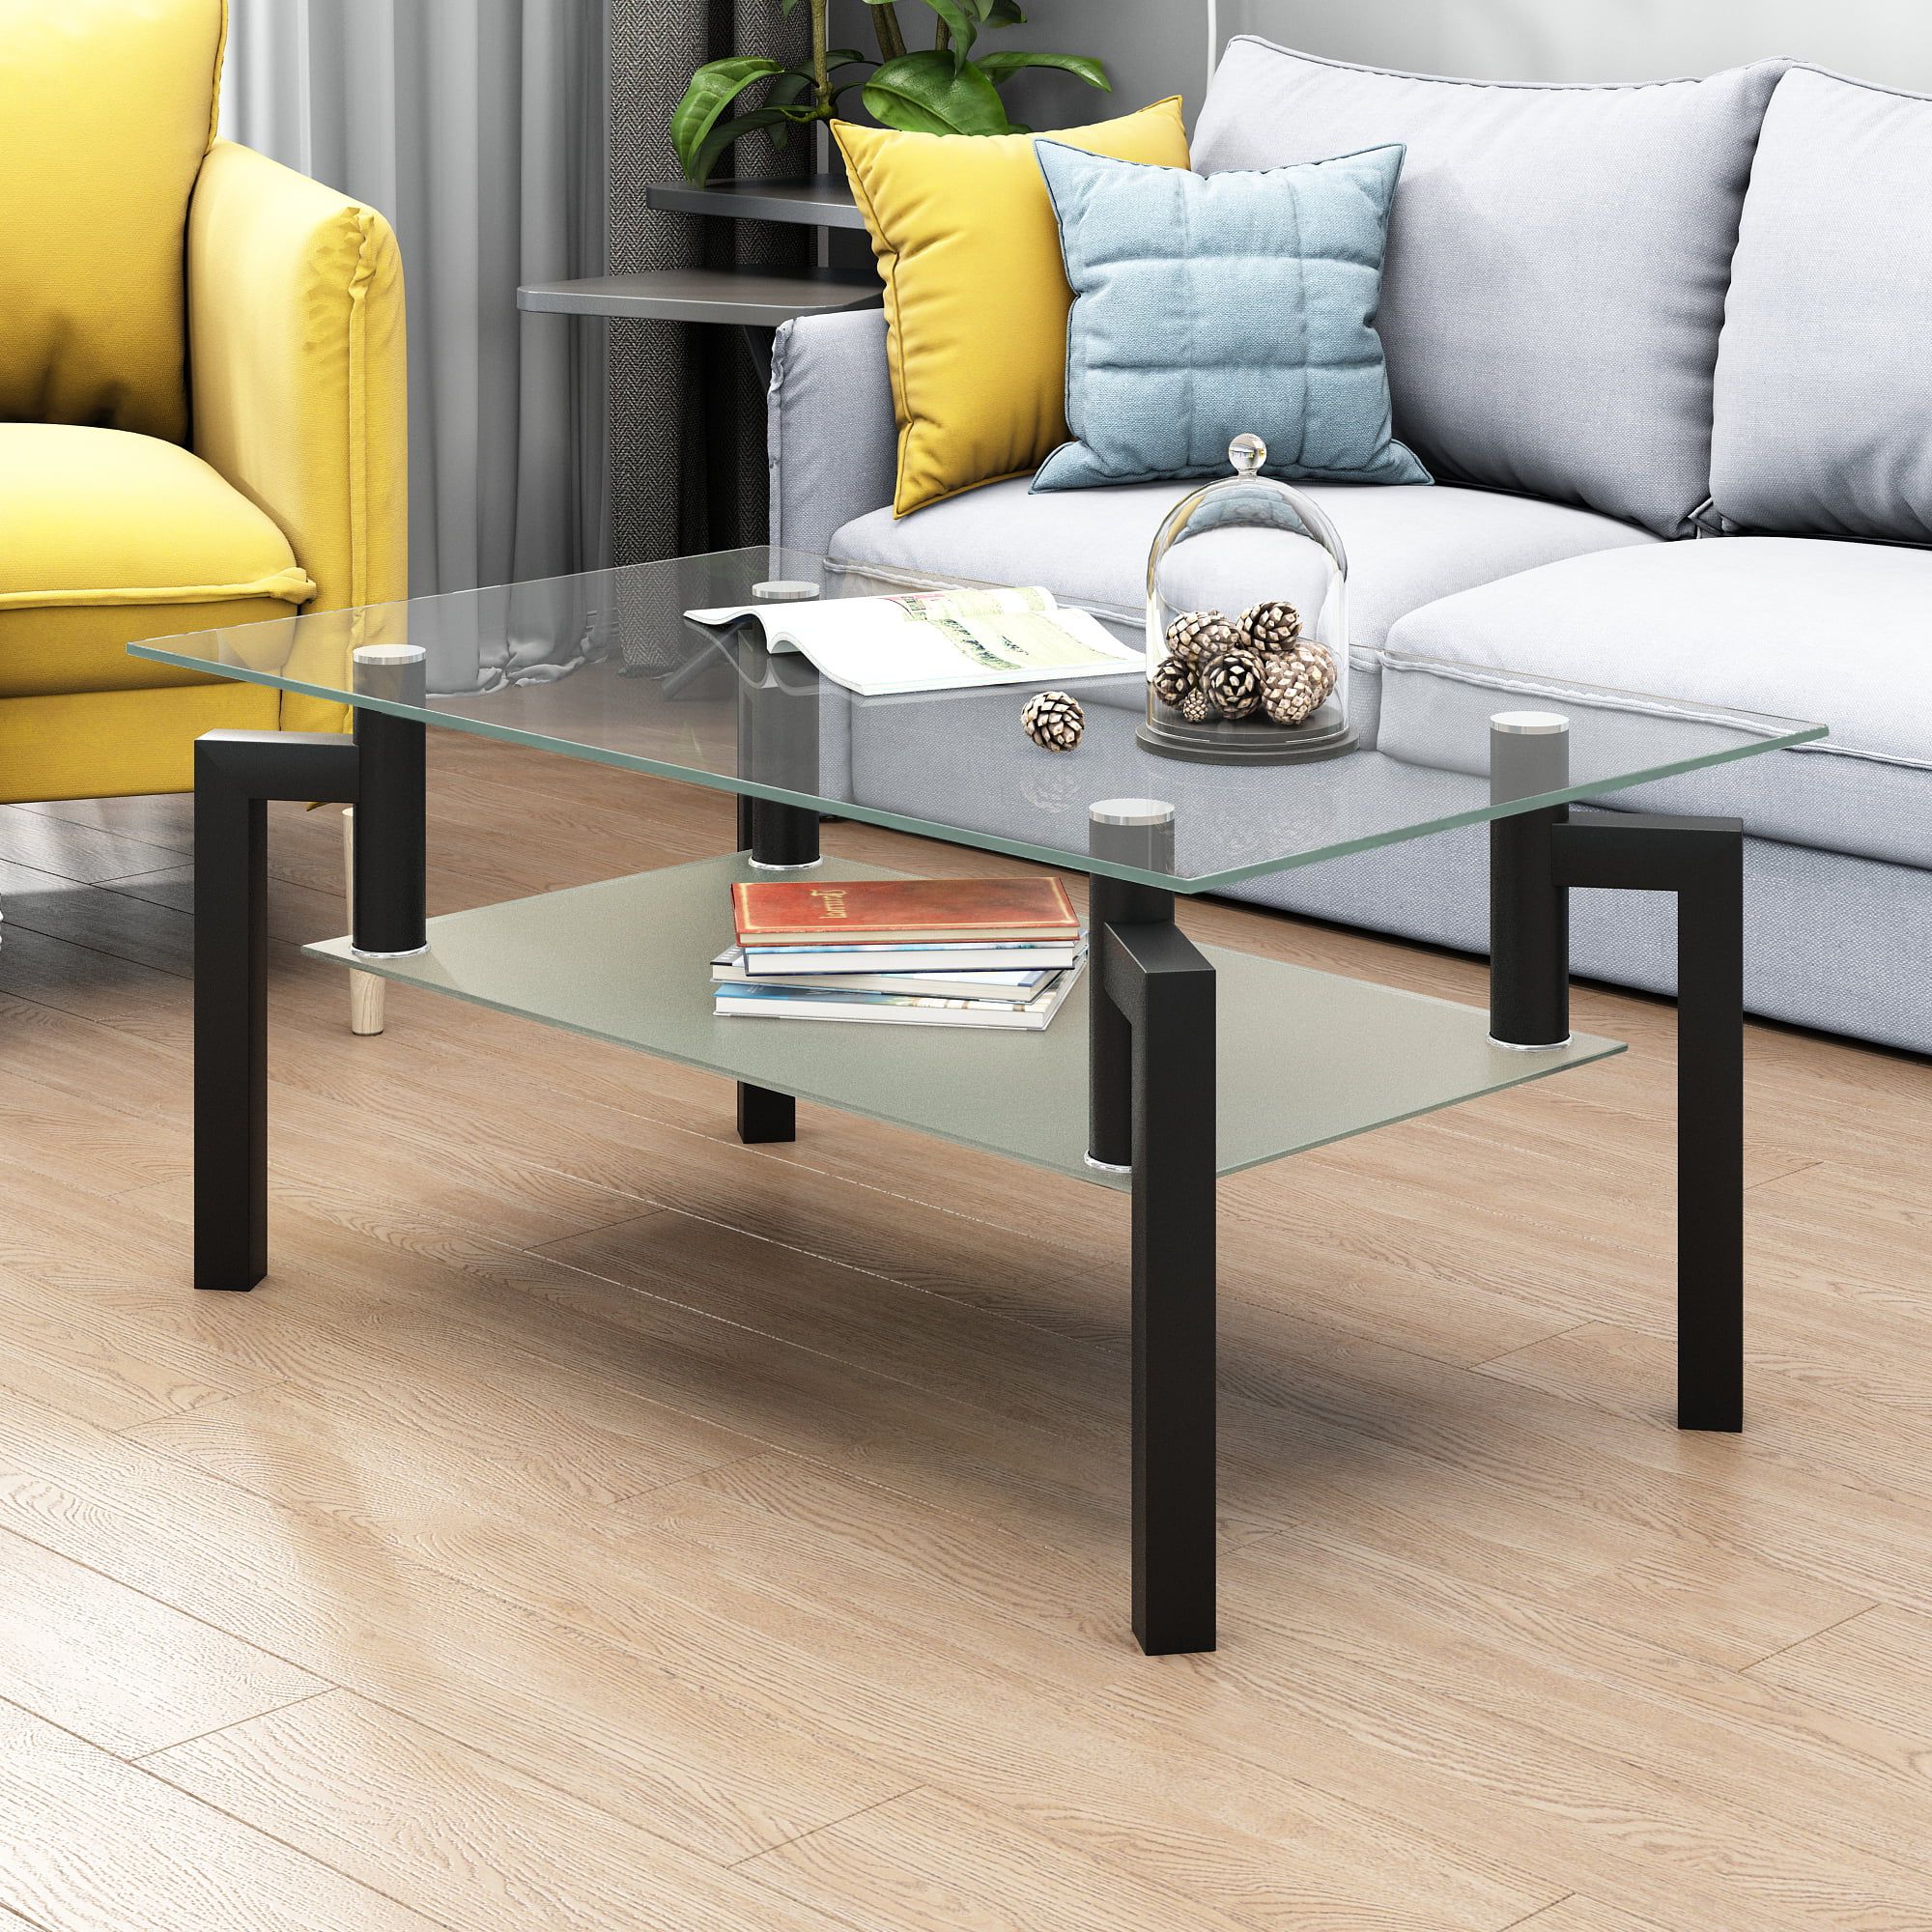 Well Known Glass Open Shelf Coffee Tables Throughout 2 Tier Glass Coffee Table, Rectangle Open Shelf Coffee Accent Table, Living  Room Table With Glass Shelf, Large Storage Space Cocktail Table, Center  Table With Wooden Legs For Home Office, B1258 – Walmart (View 10 of 20)